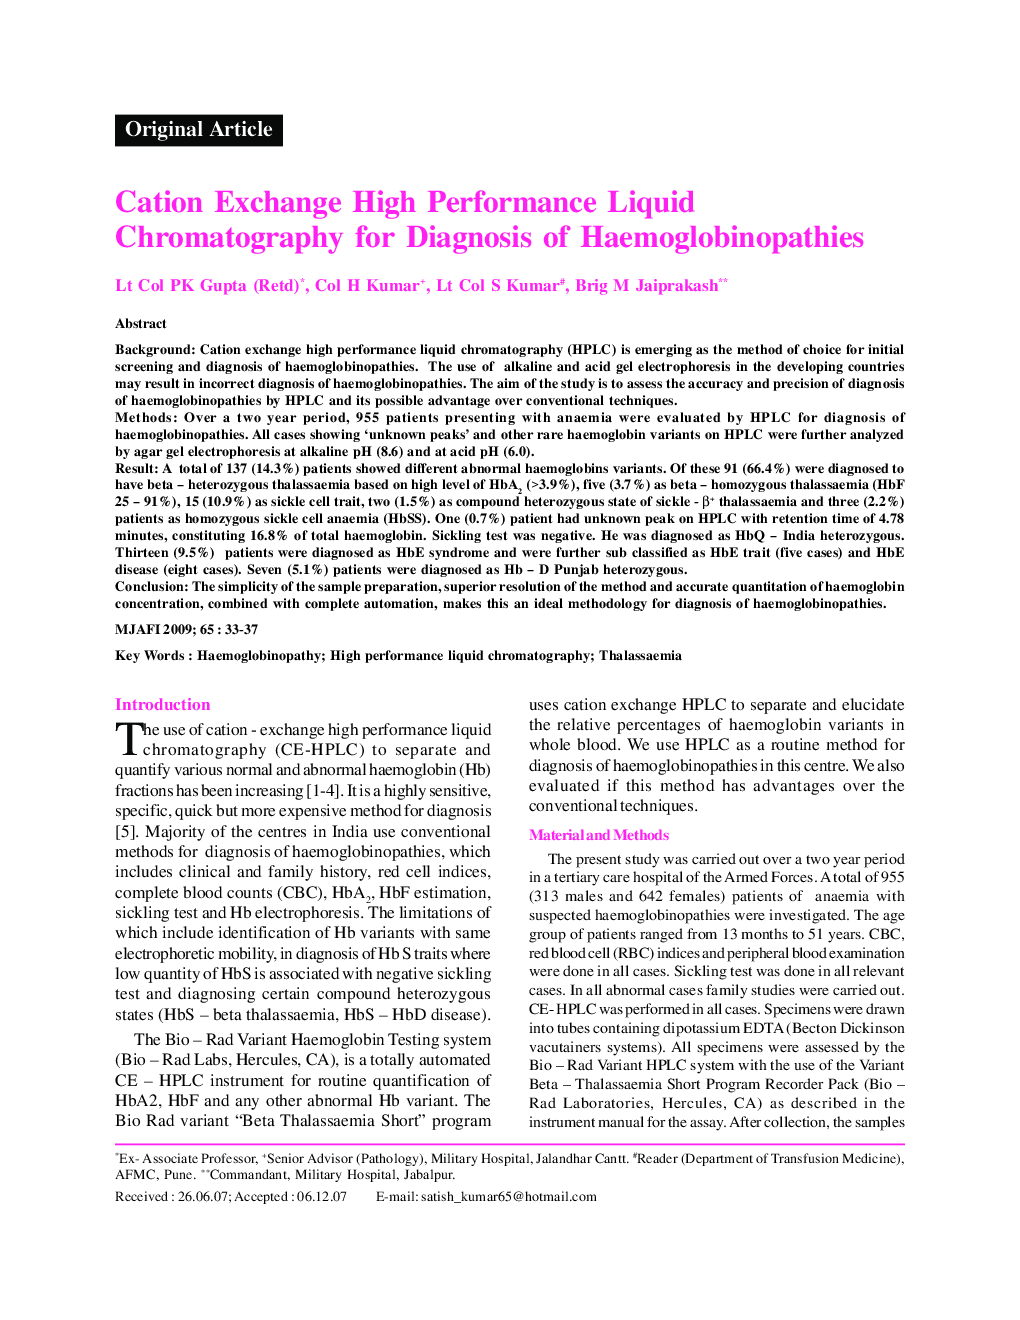 Cation Exchange High Performance Liquid Chromatography for Diagnosis of Haemoglobinopathies